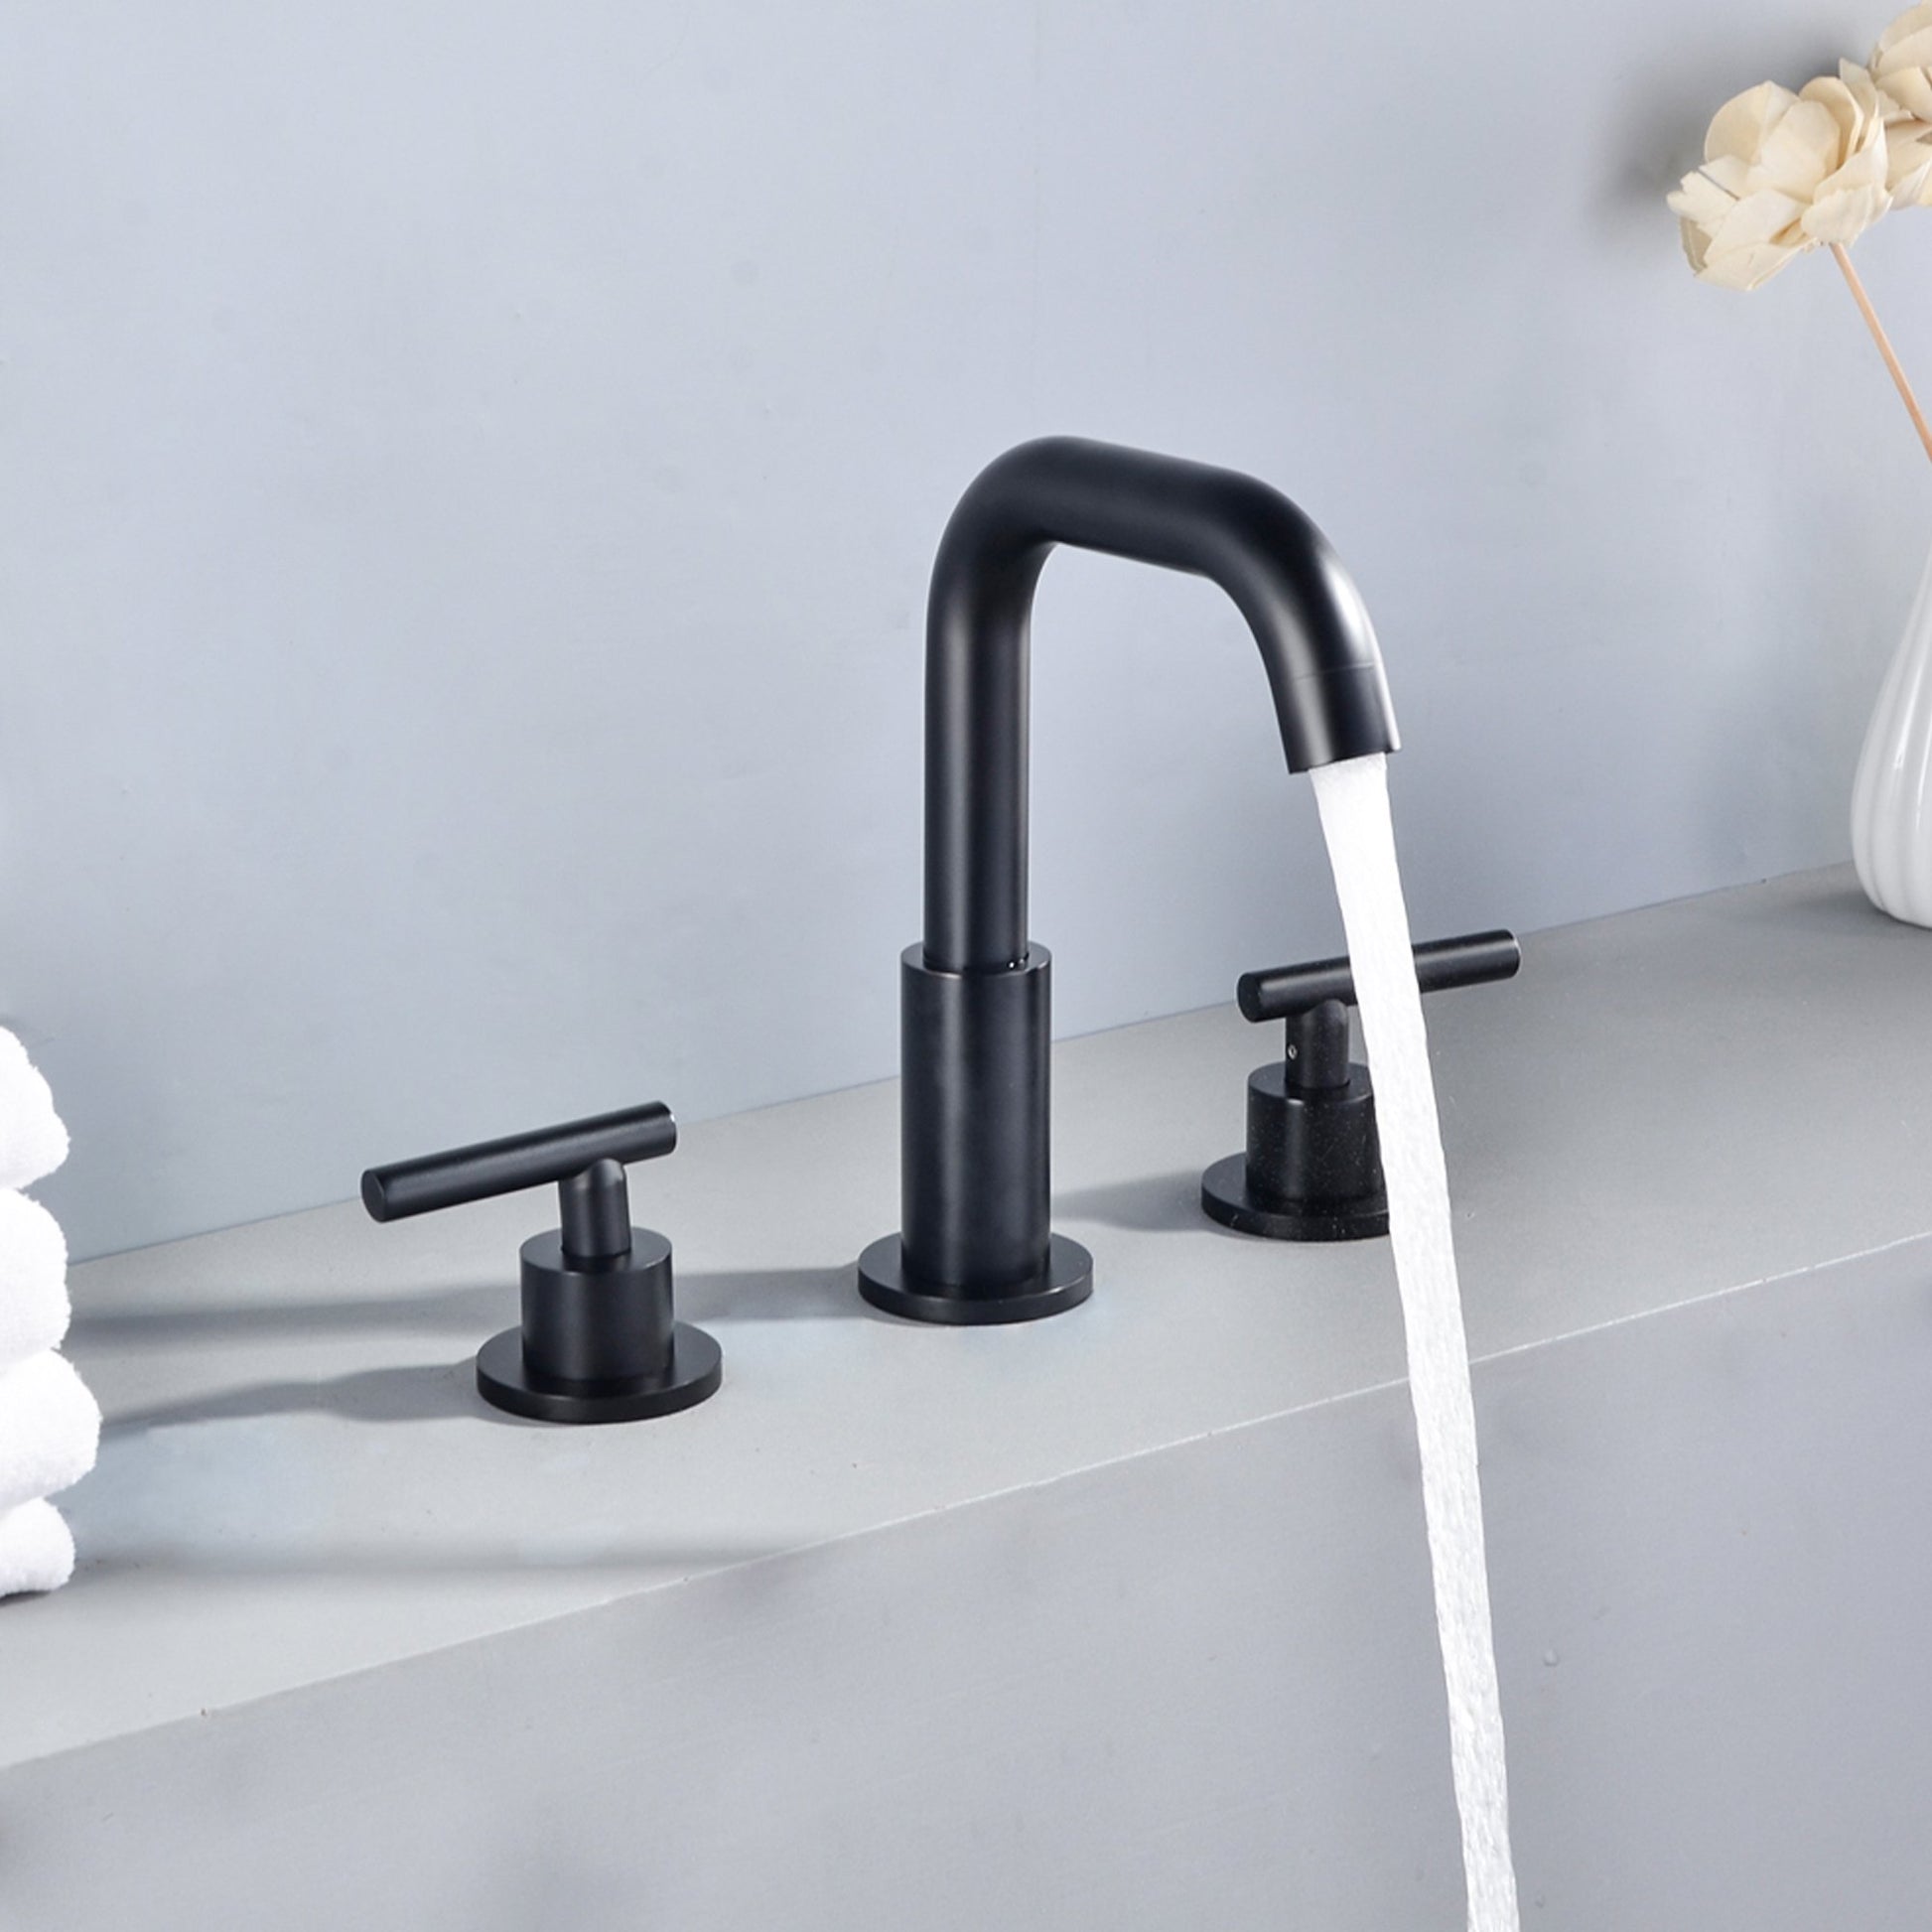 8 in. Widespread 2-Handle Mid-Arc Bathroom Faucet with Valve and cUPC Water Supply Lines in Matte Black - Alipuinc